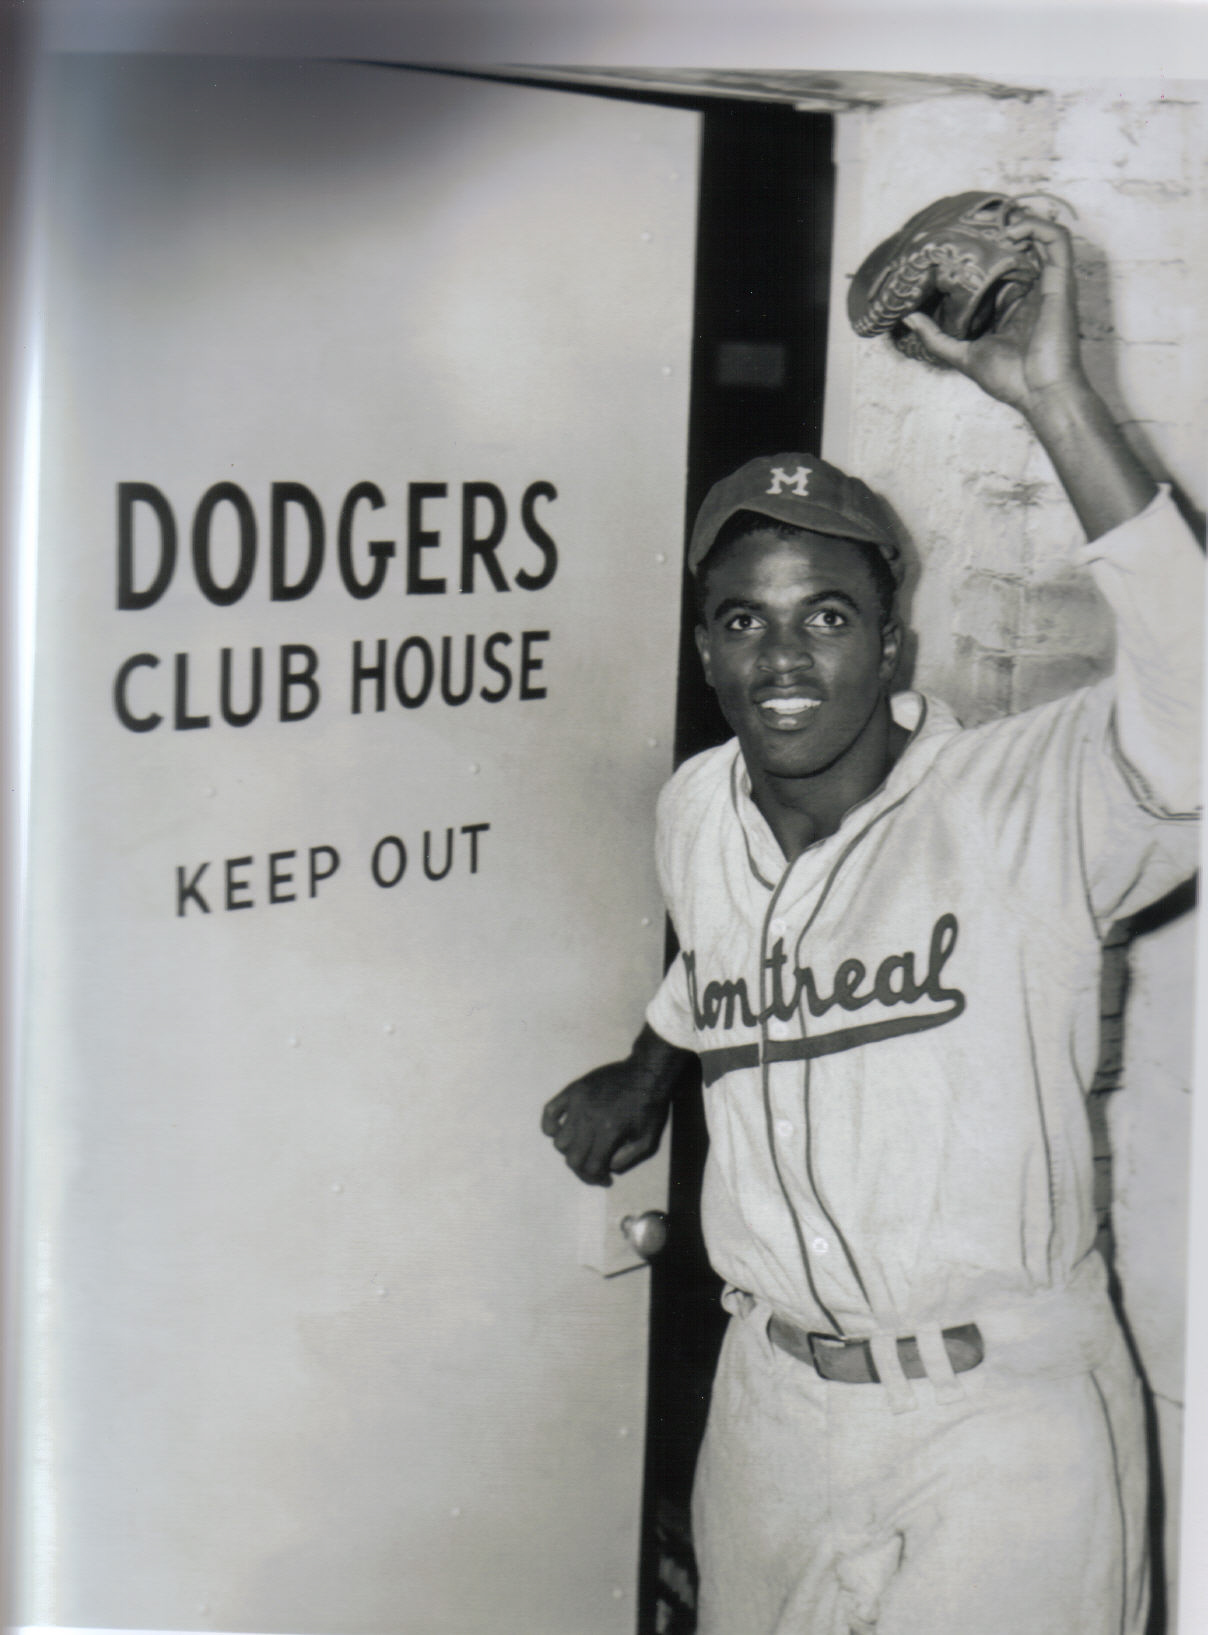 Jackie Robinson breaking the color barrier: April 15, 1947